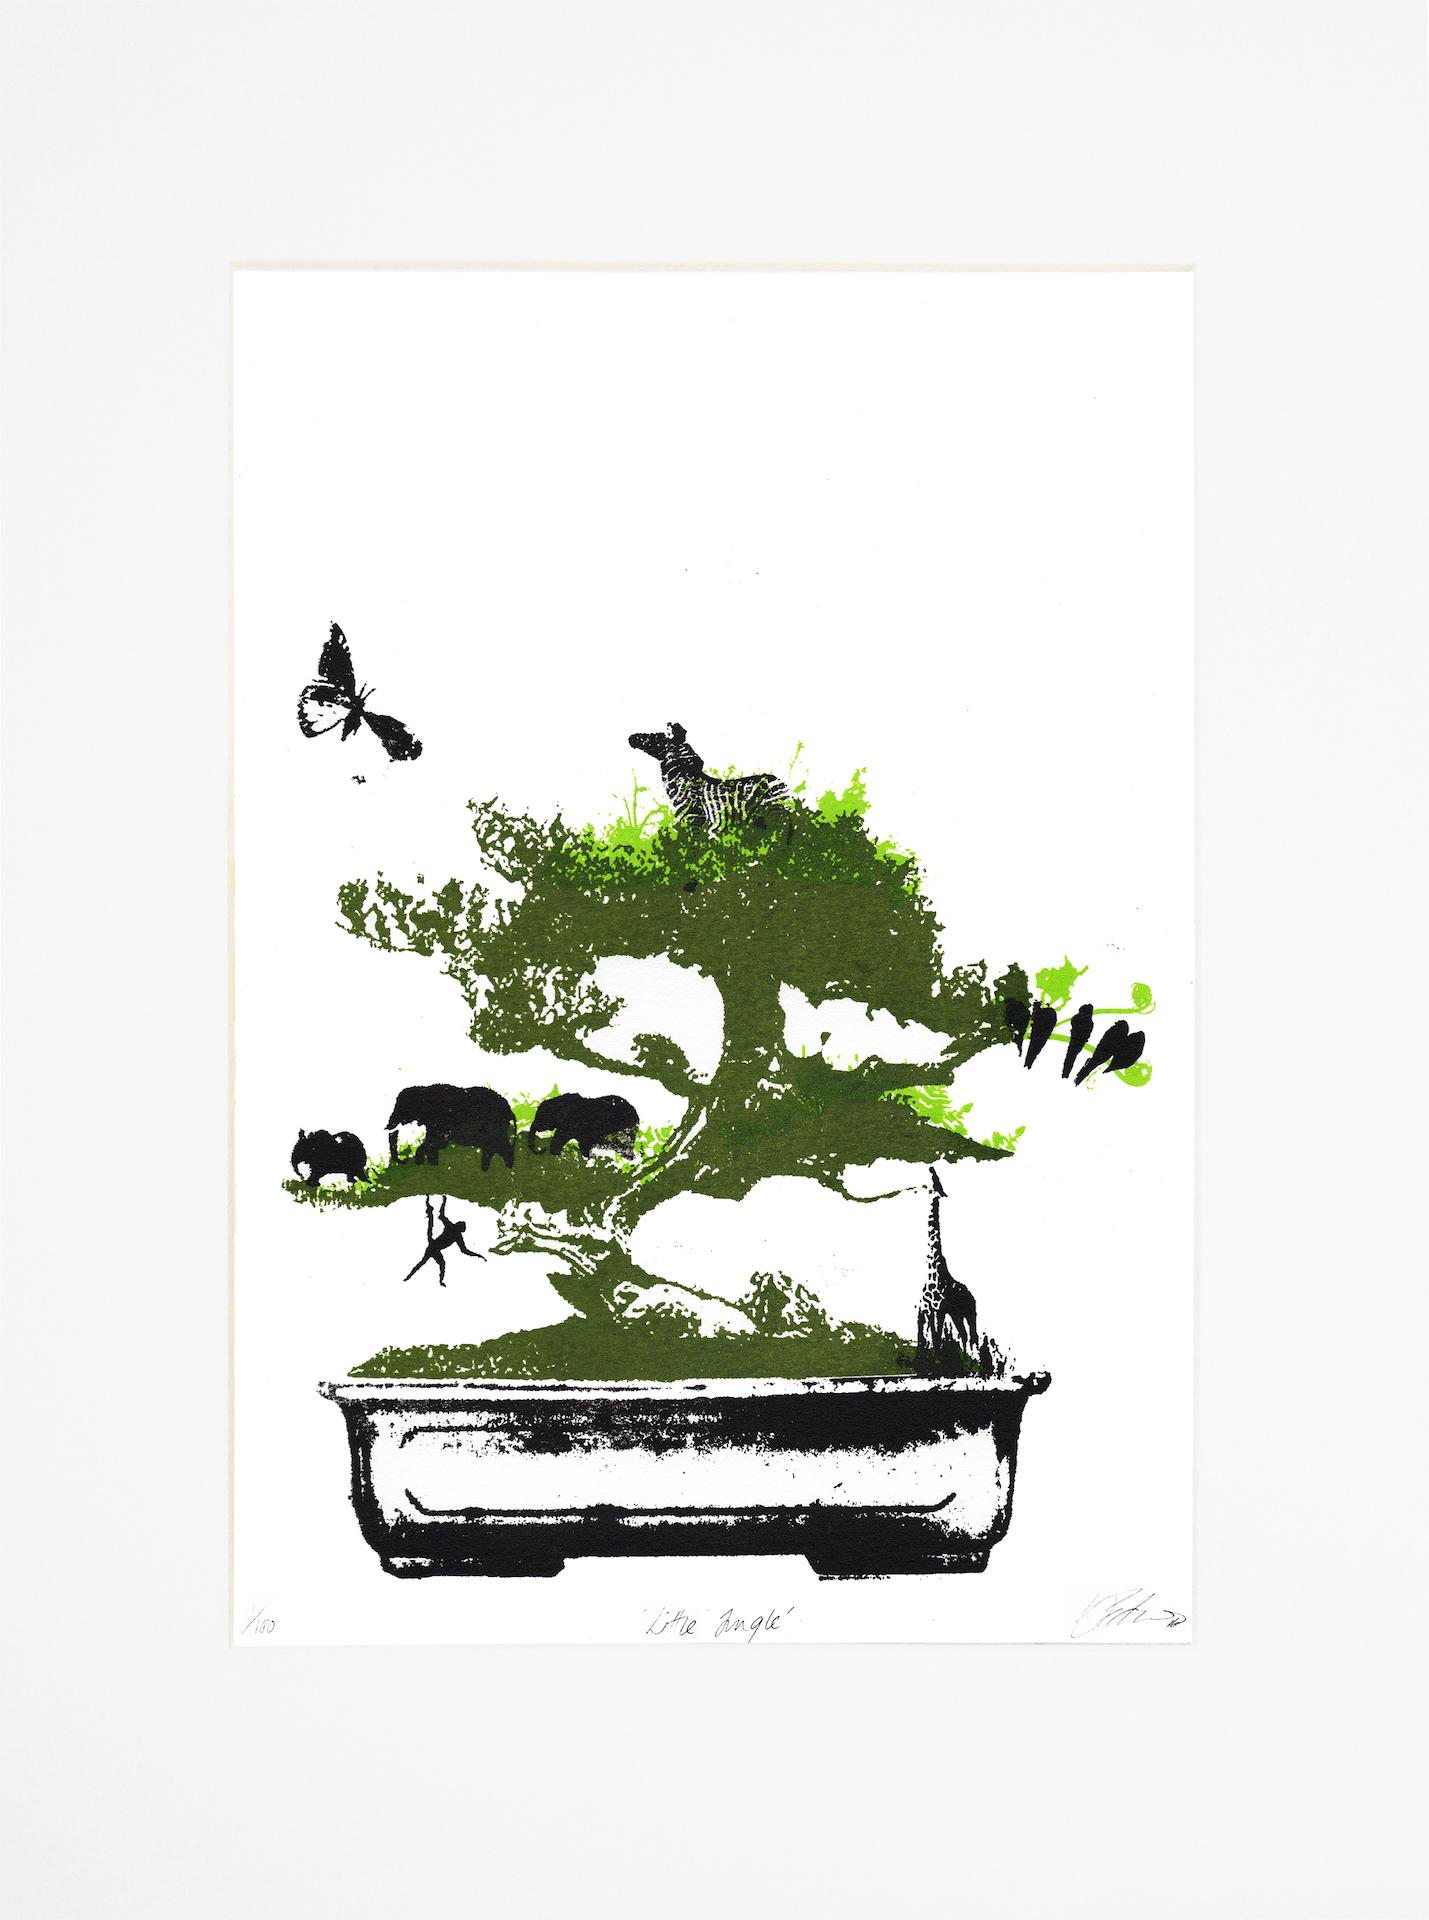 Katie Edwards
Little Jungle
Limited Edition 3 Colour Silkscreen Print
Edition of 100
Mounted Size: H 40.5cm x W 30.5cm x D 0.5cm
Sold Unframed
(Please note that in situ images are purely an indication of how a piece may look)

Little Jungle is a